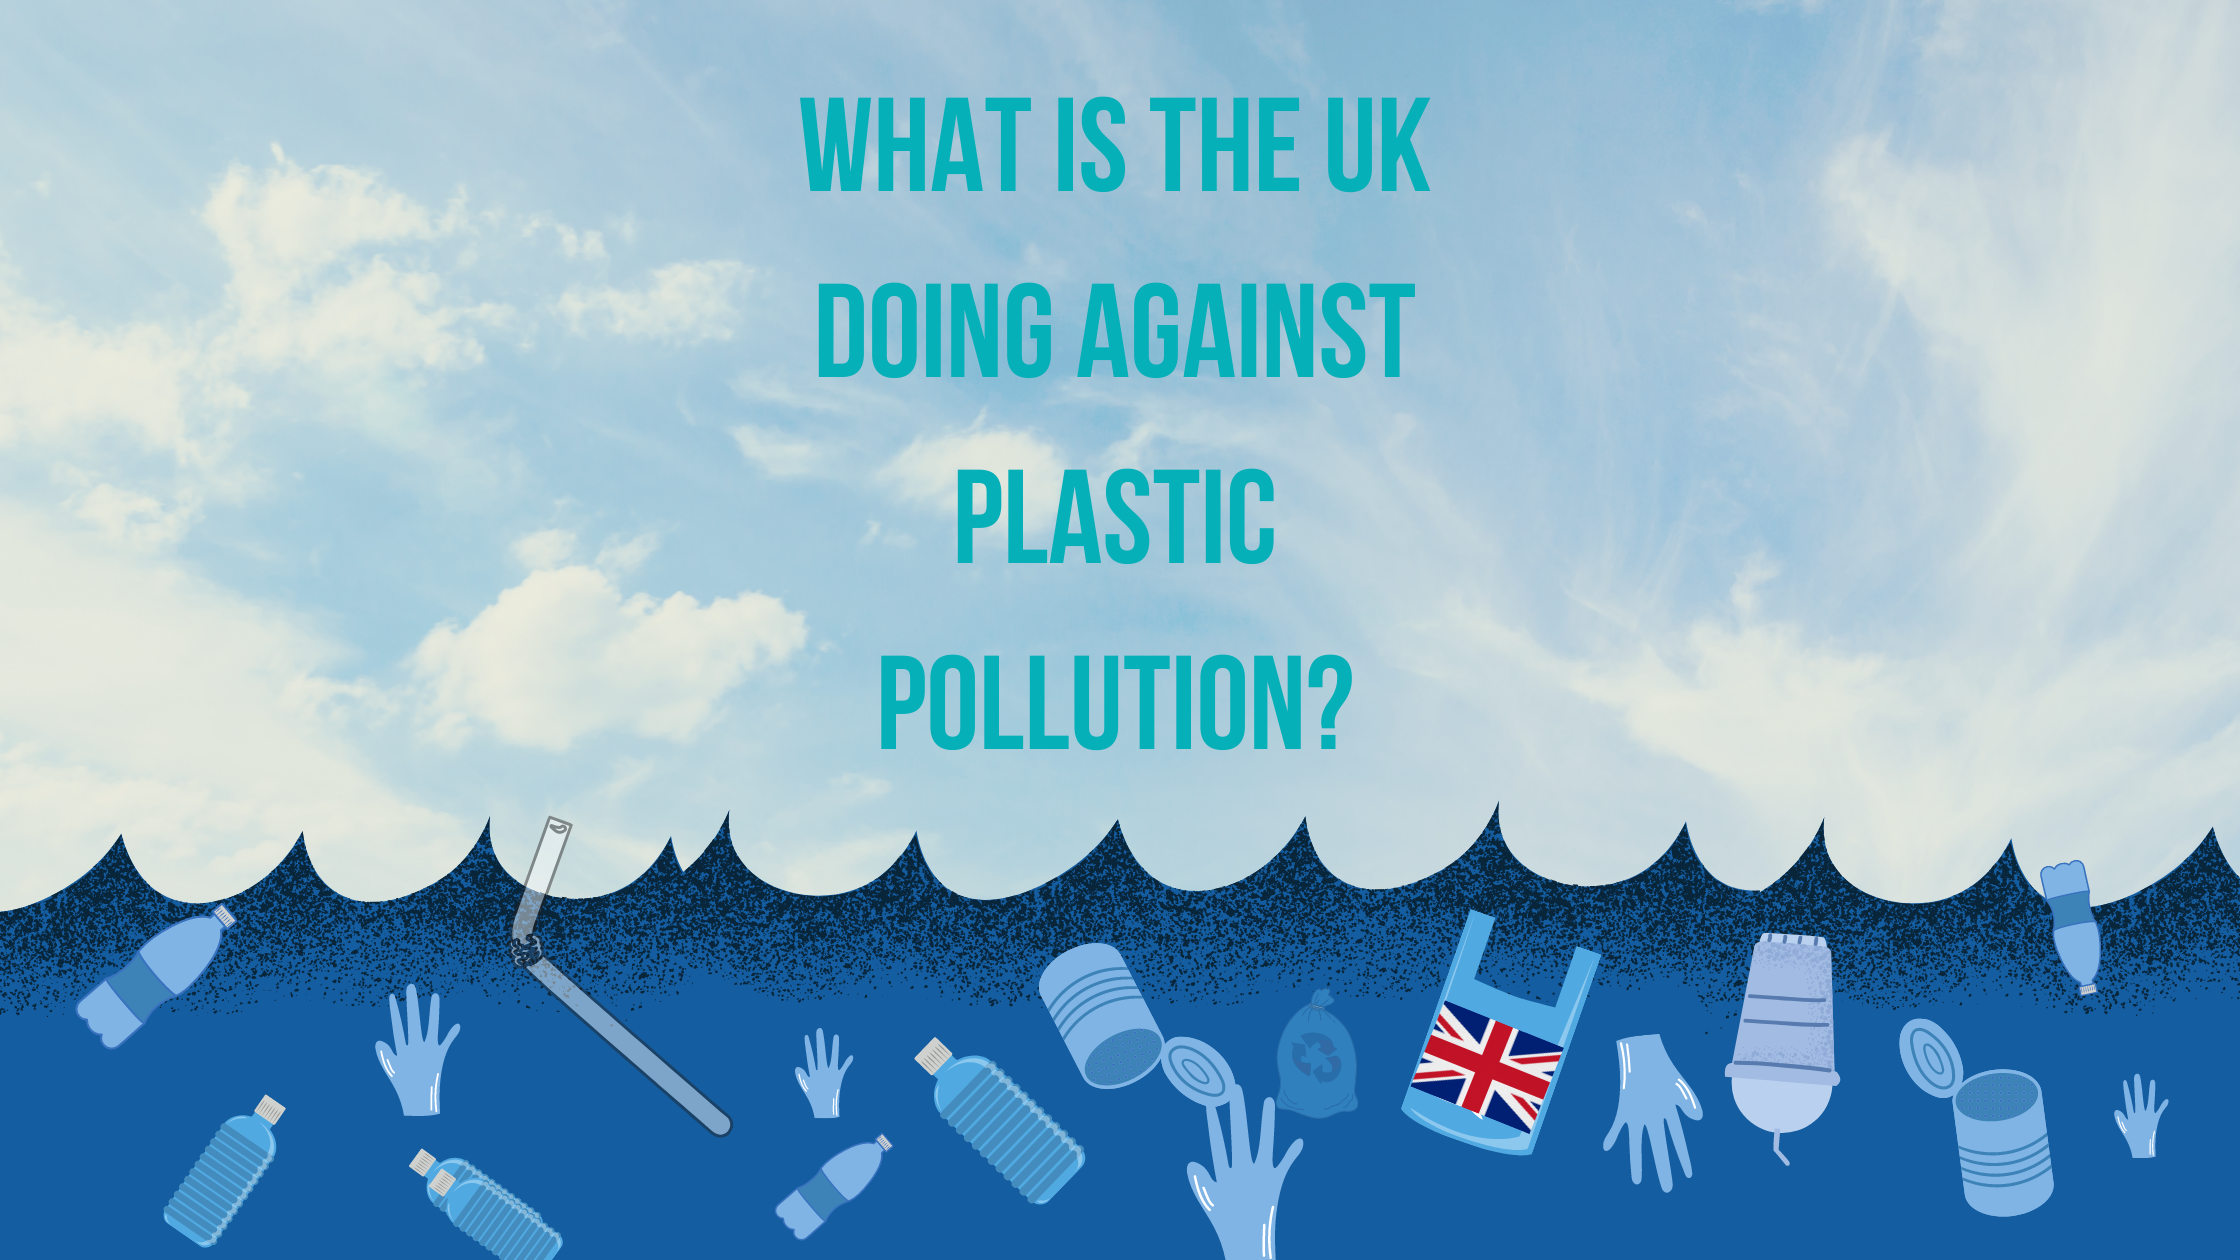 What is the UK doing against plastic pollution?